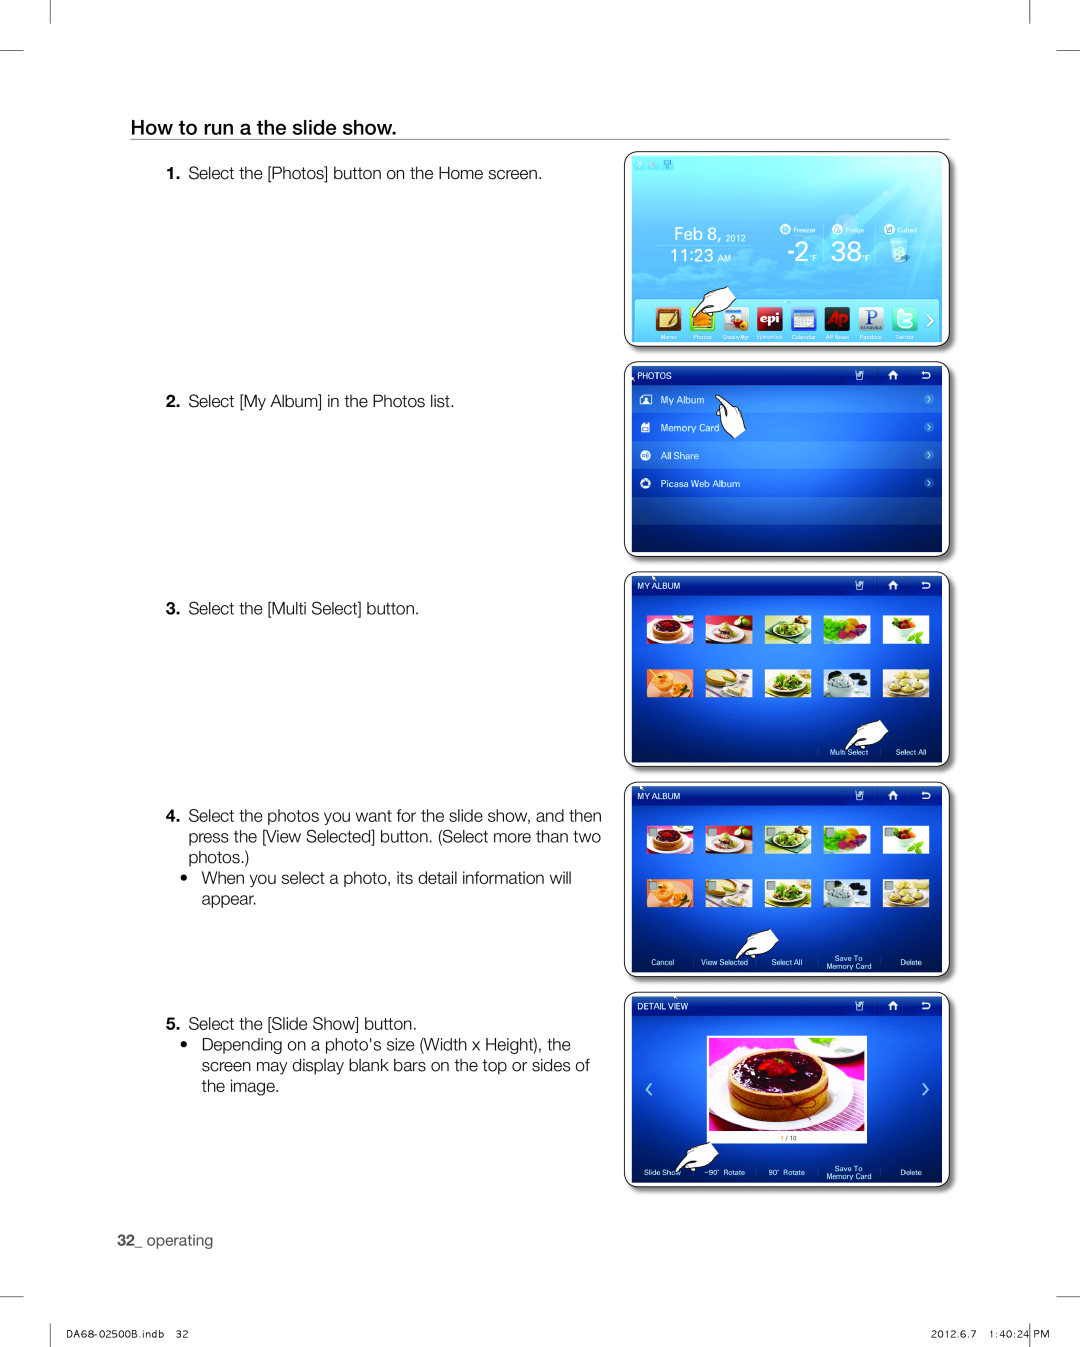 Samsung RSG309AARS user manual How to run a the slide show, operating 